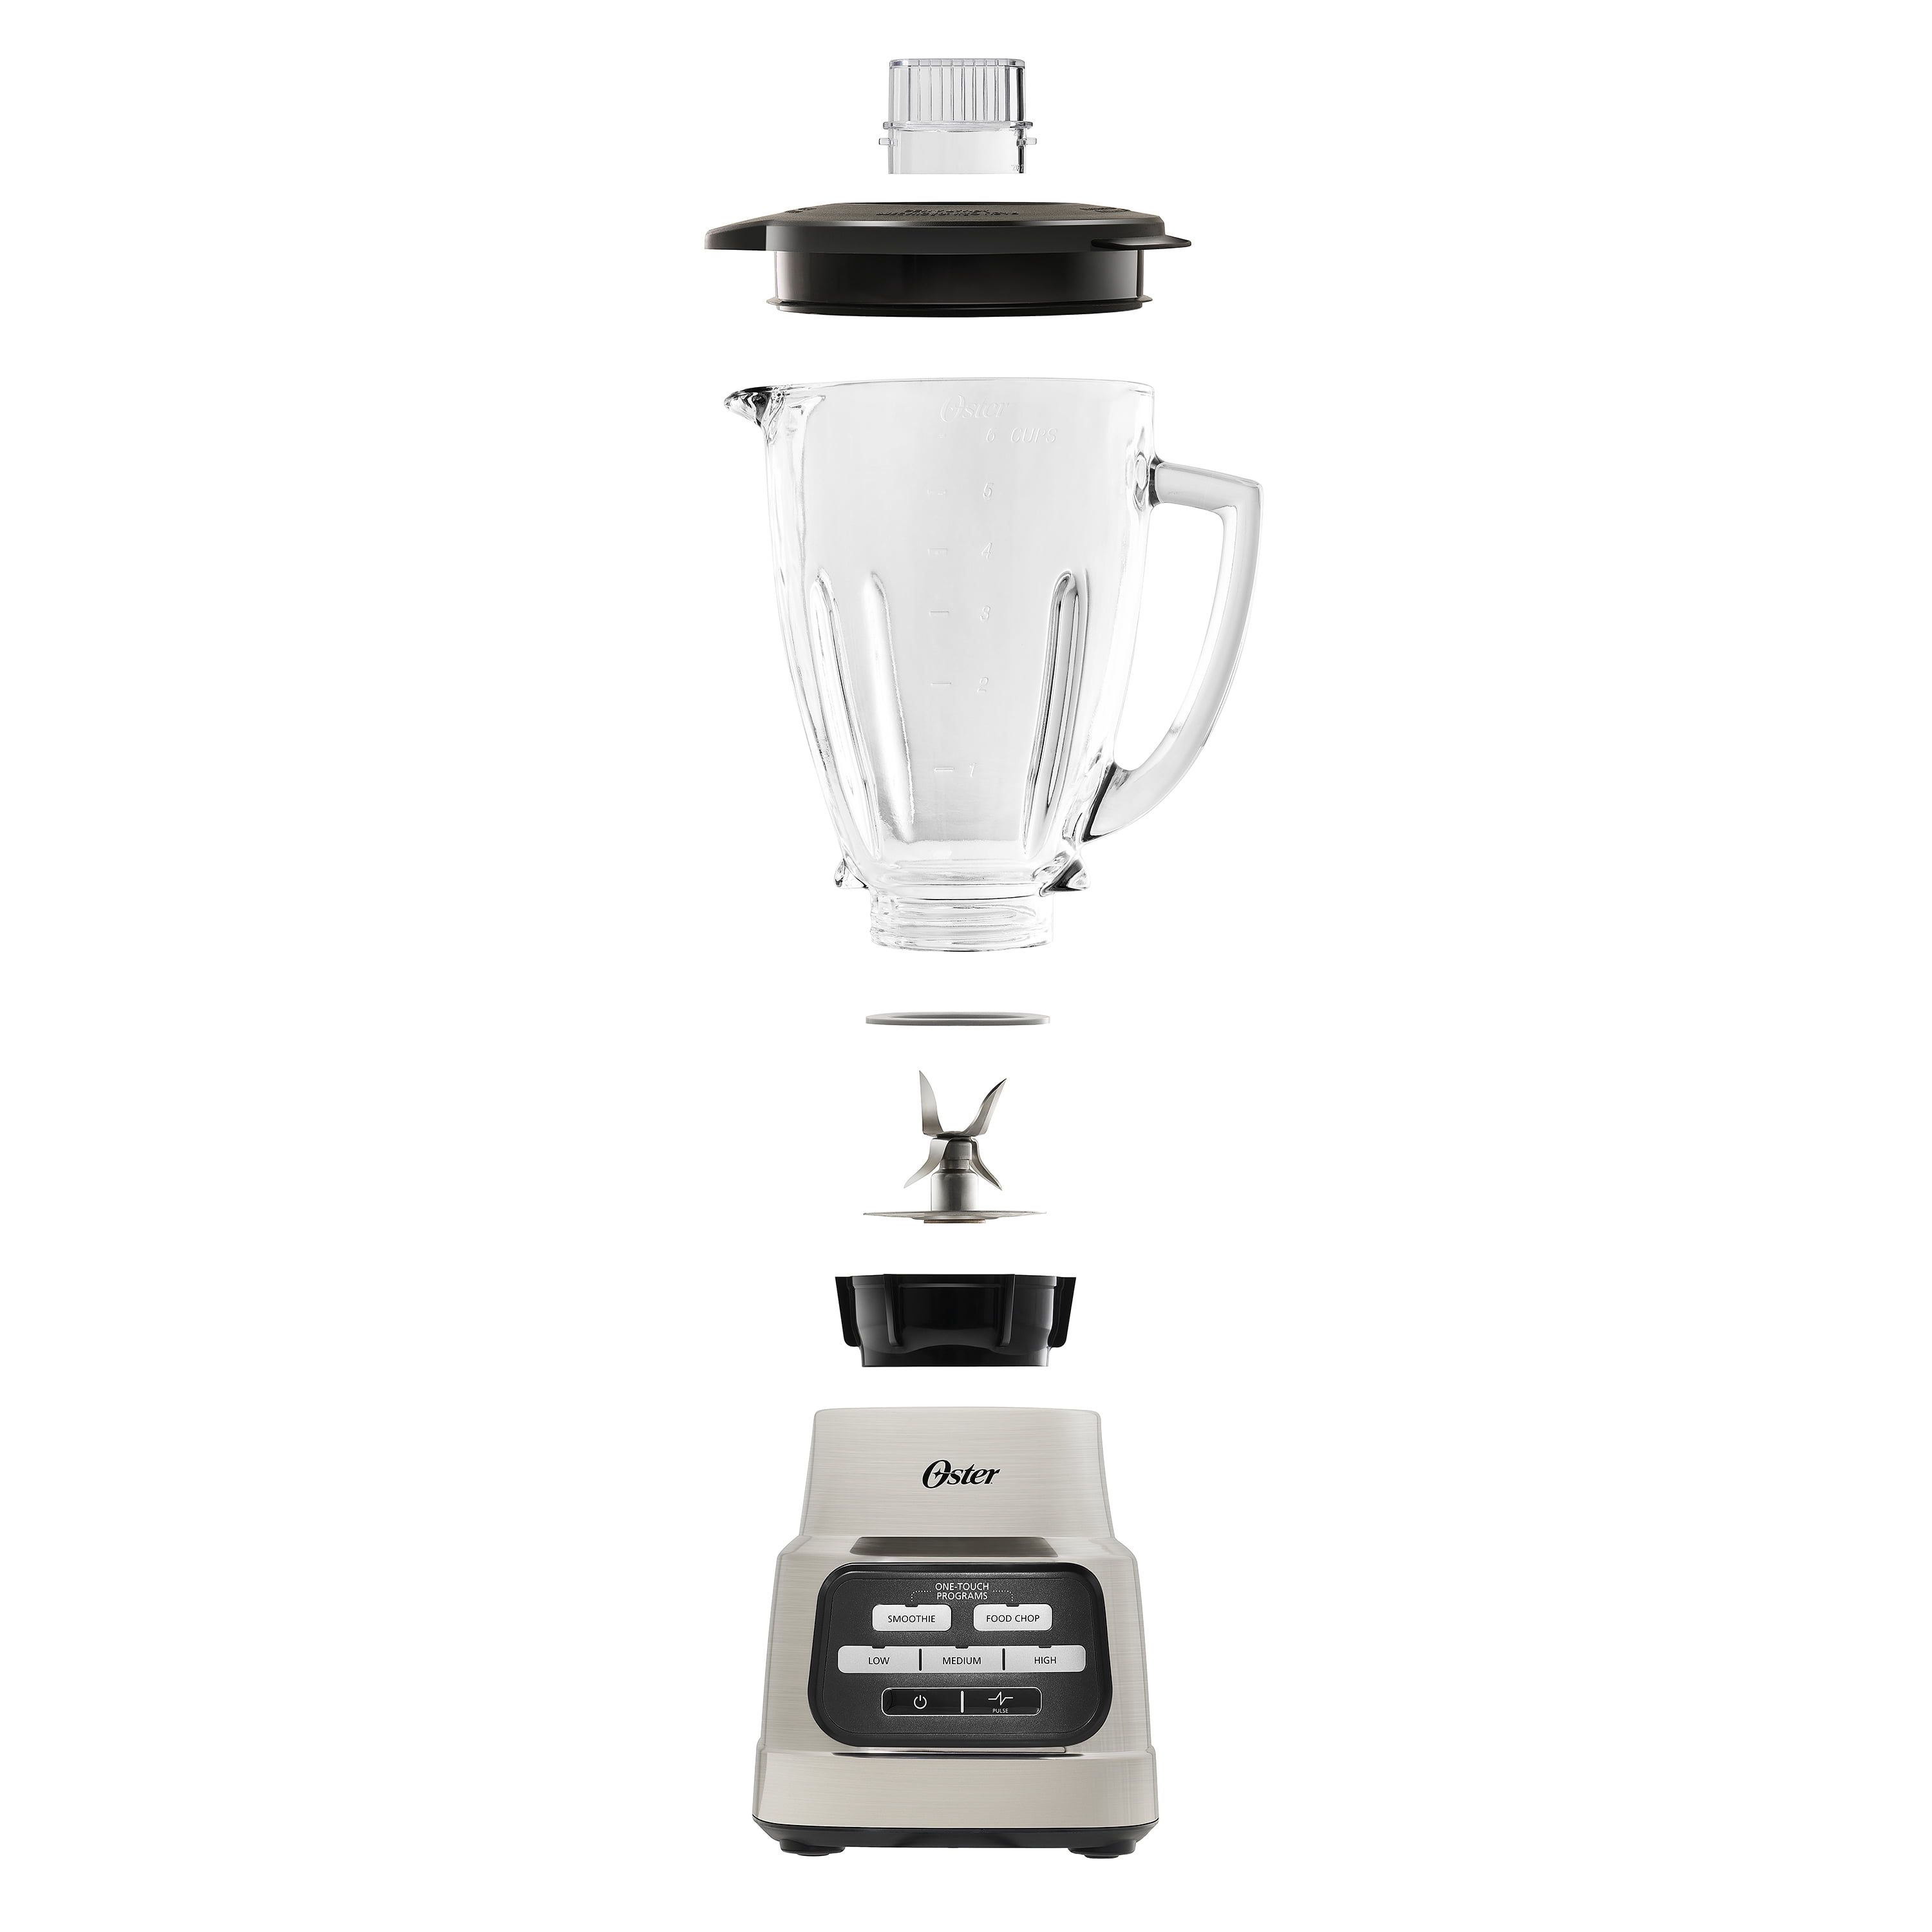 Oster One-Touch Blender with Auto-Programs and 6-Cup Boroclass Glass Jar - 2